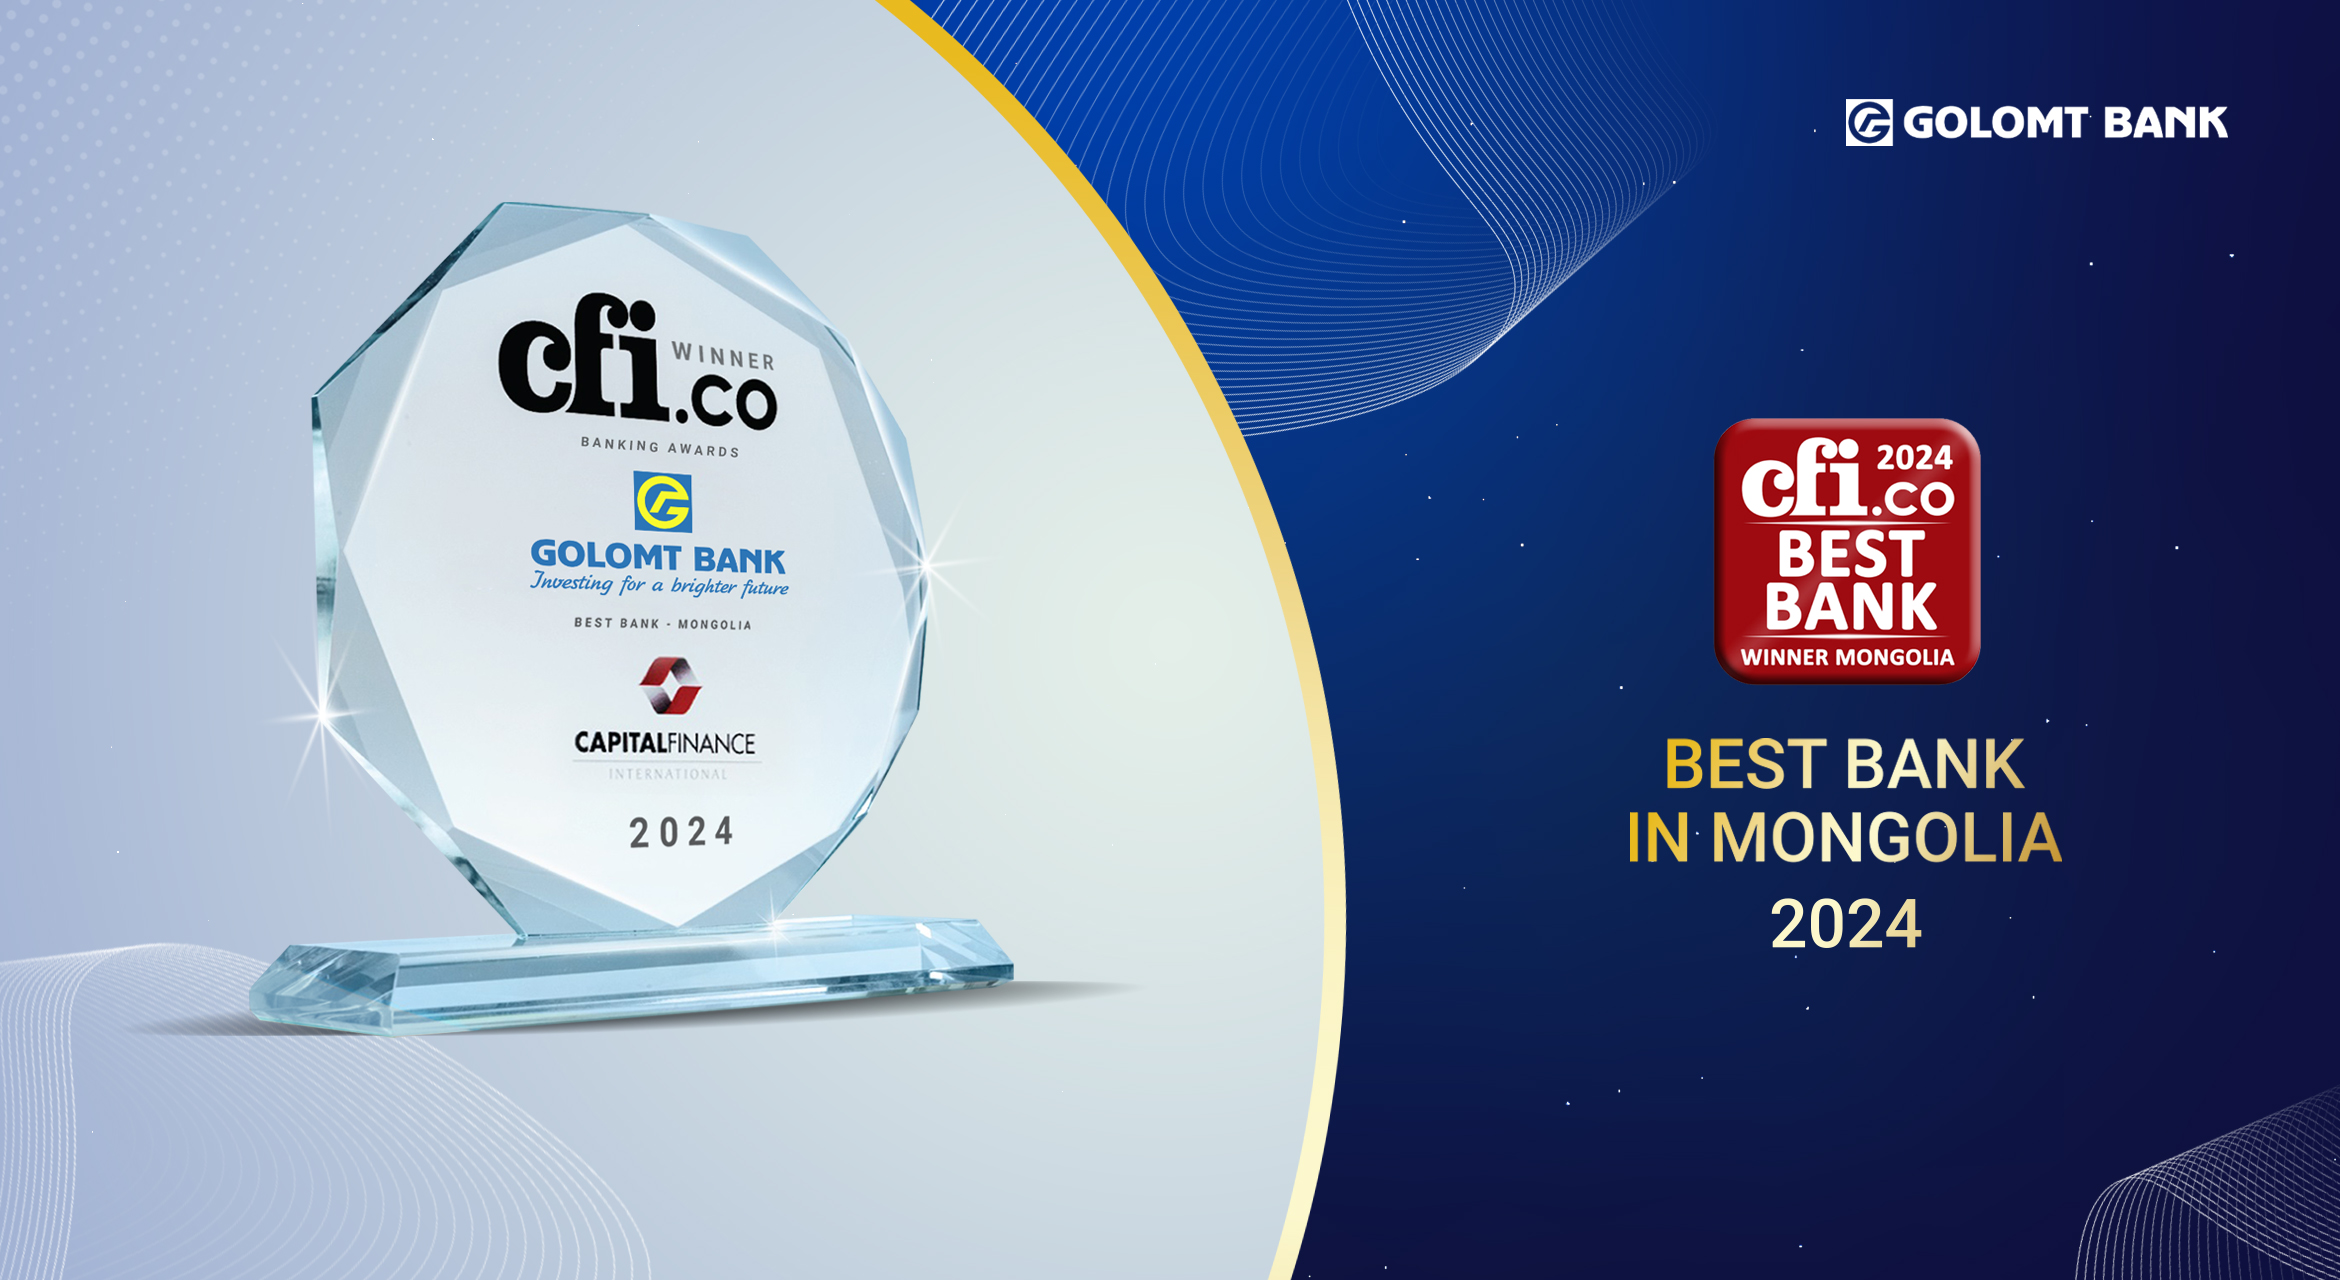 CFI.CO AWARDS RECOGNIZES GOLOMT BANK AS THE BEST BANK IN MONGOLIA